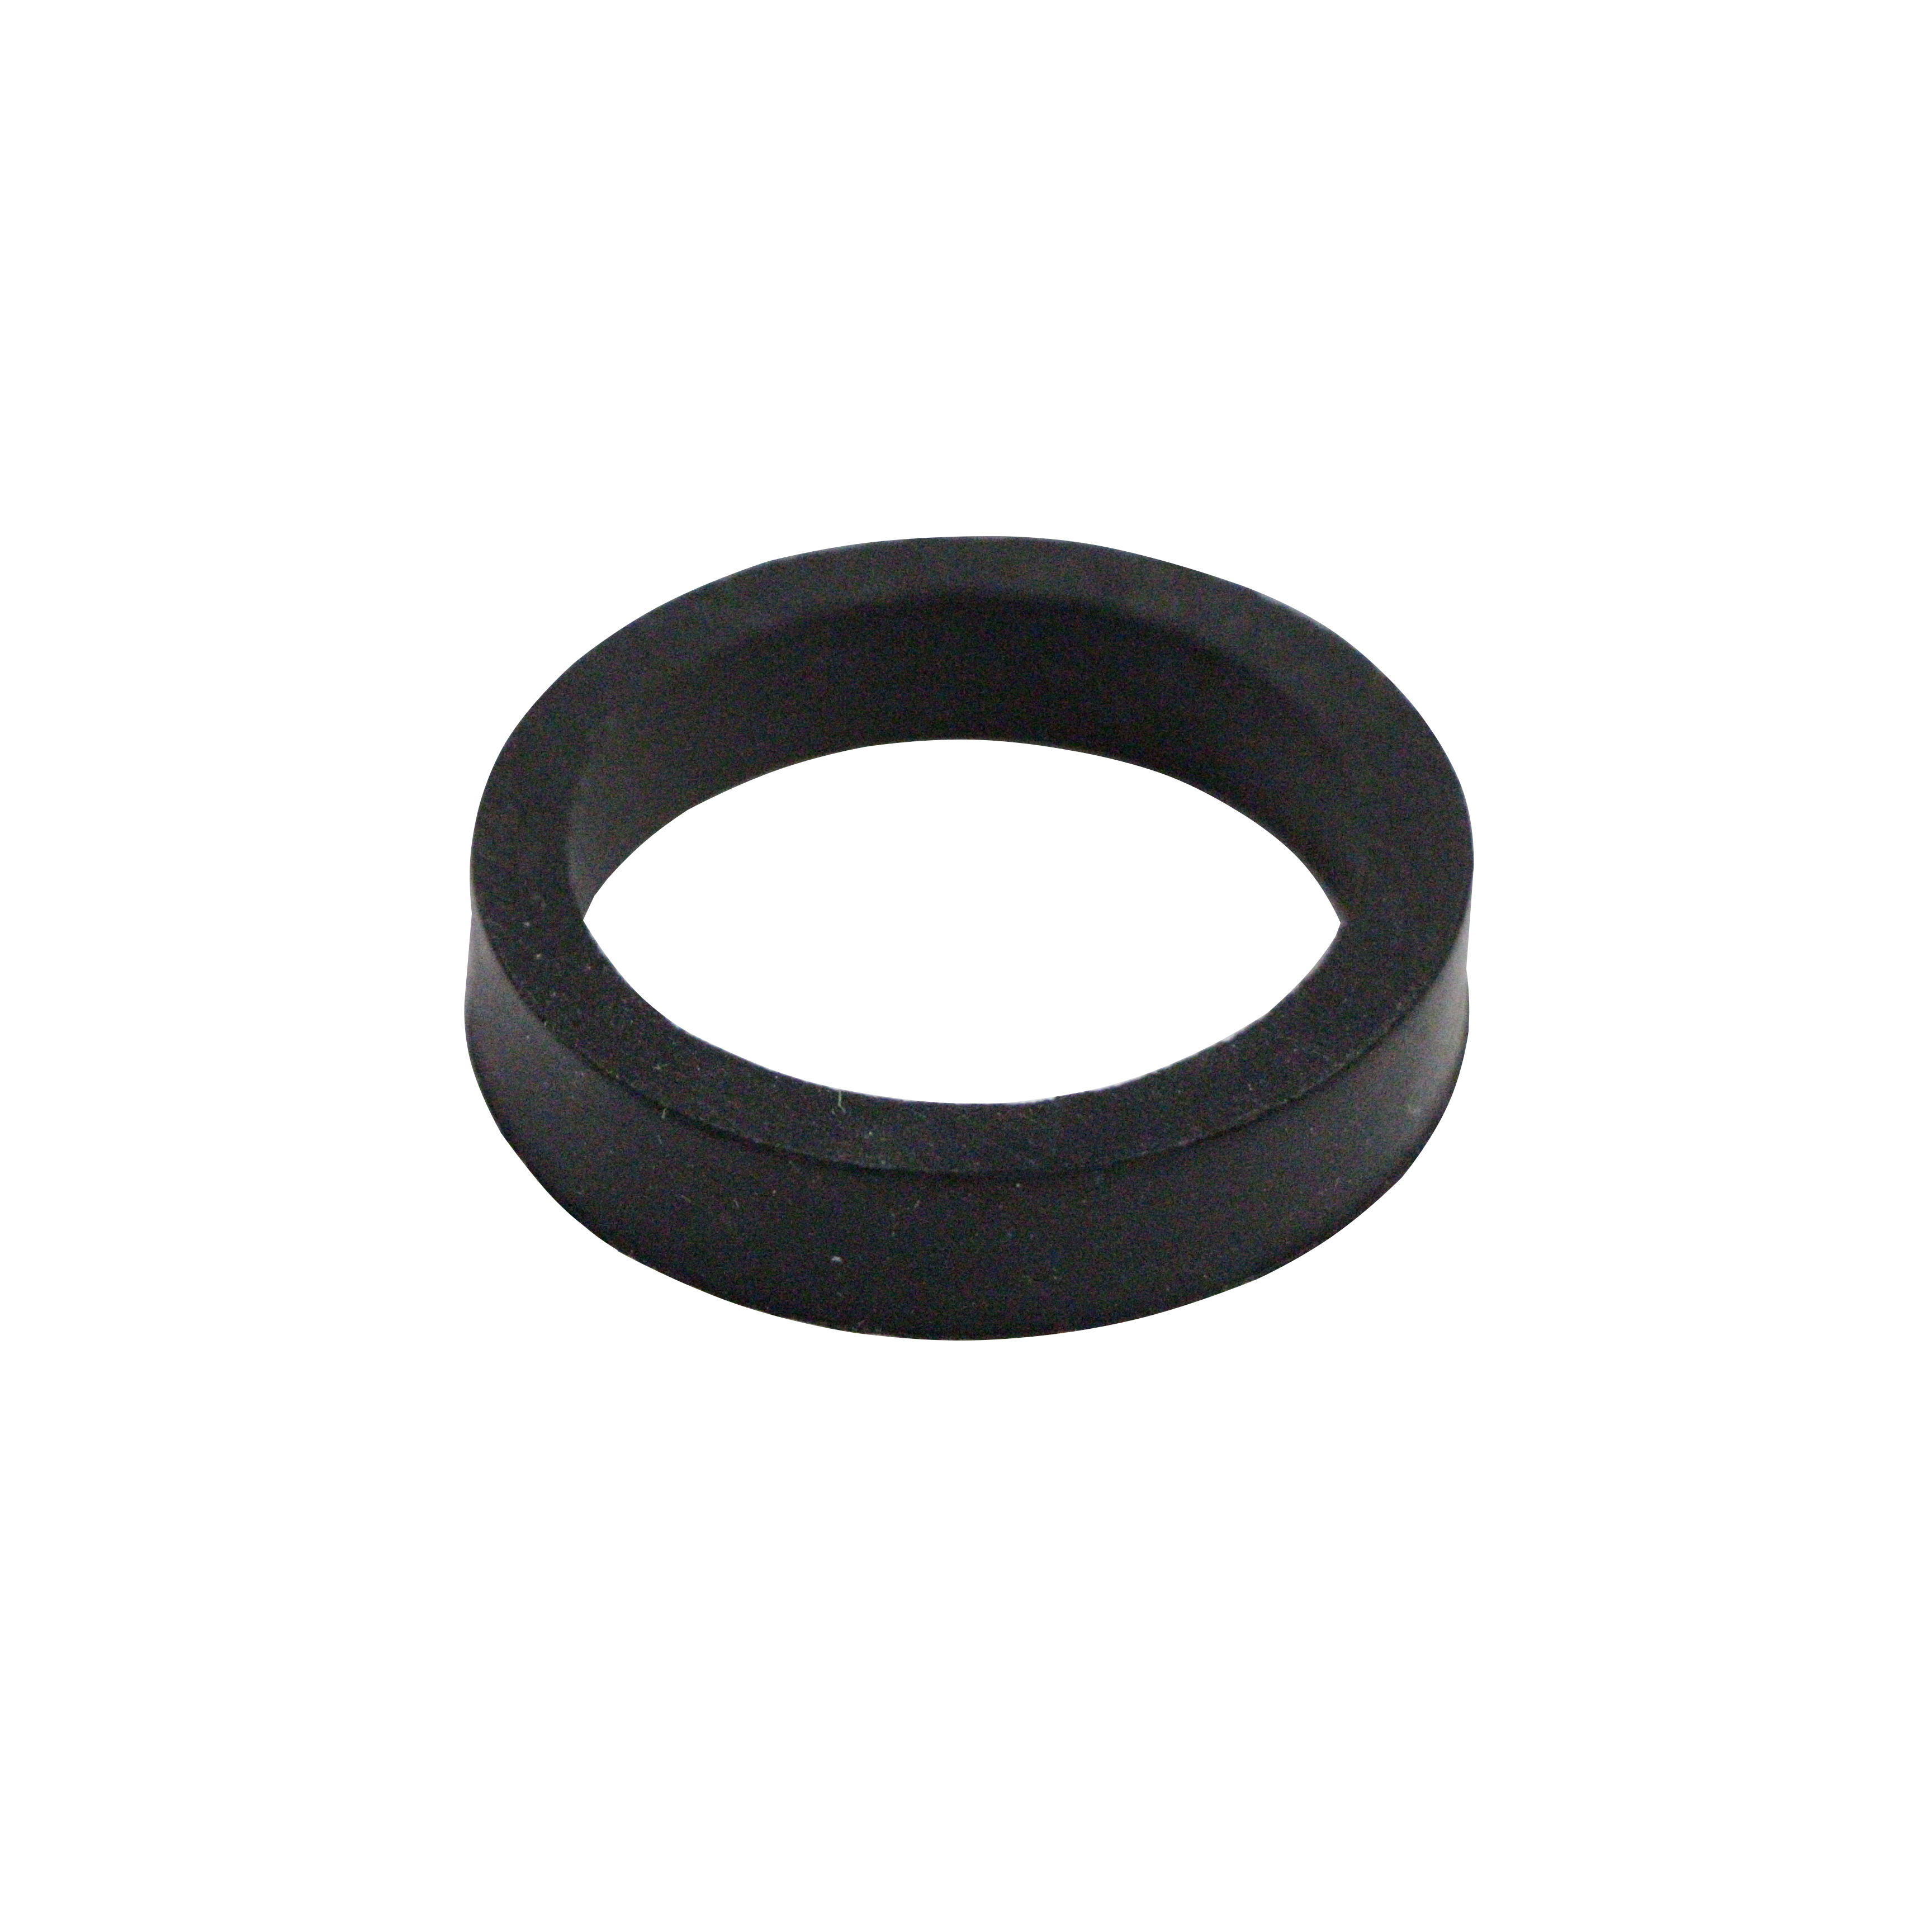 Sealing Ring For Stihl 070 090 Chainsaw OEM 1106 149 0400